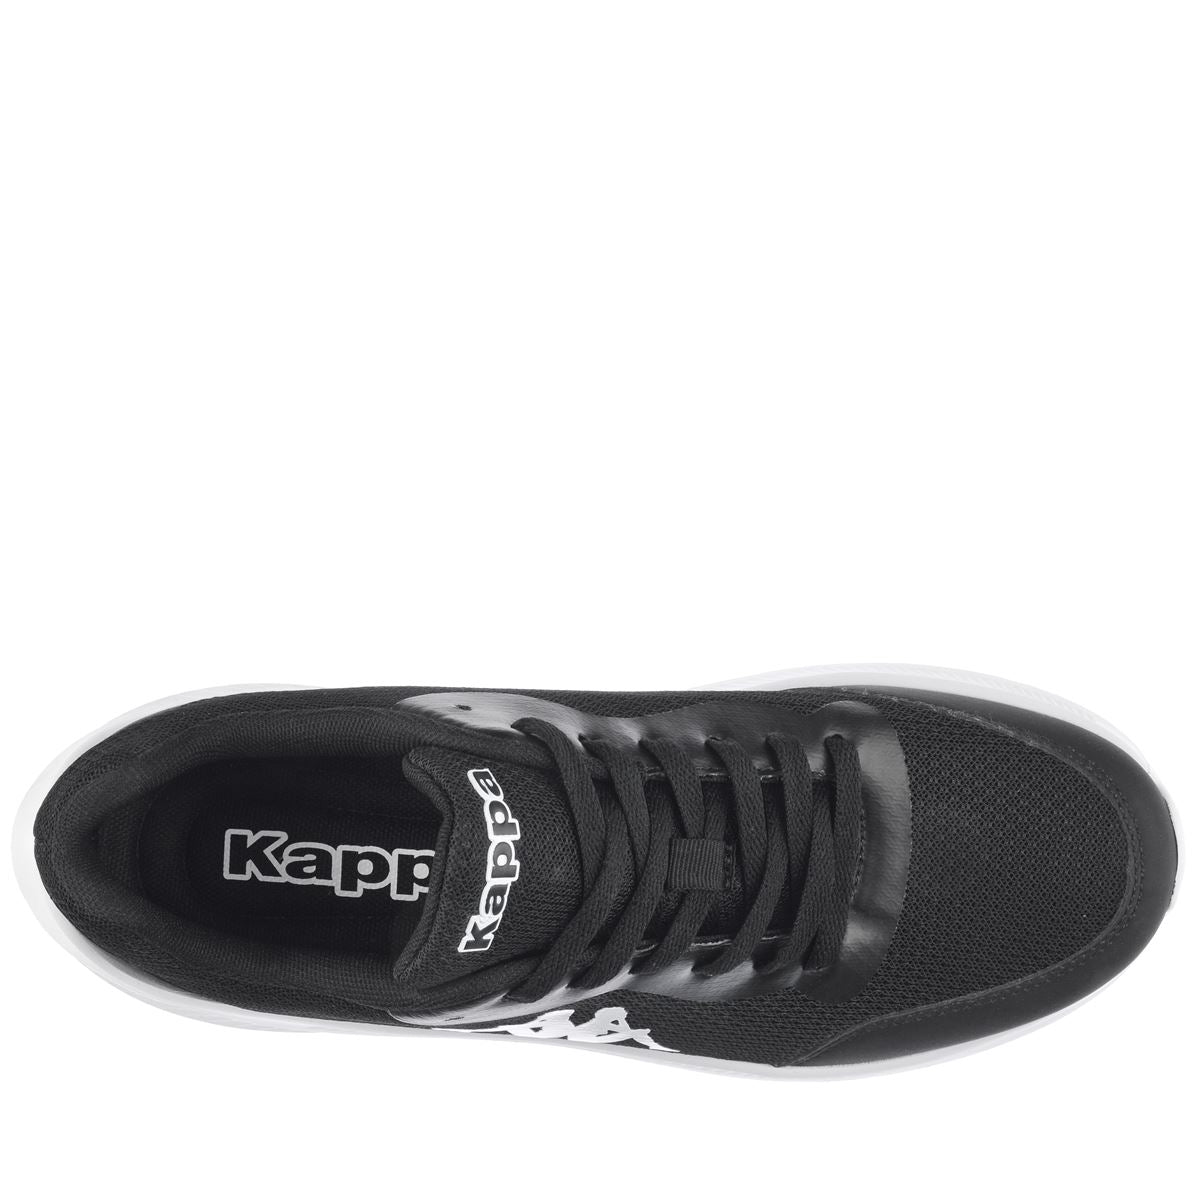 Chaussures Boldy Noir Homme